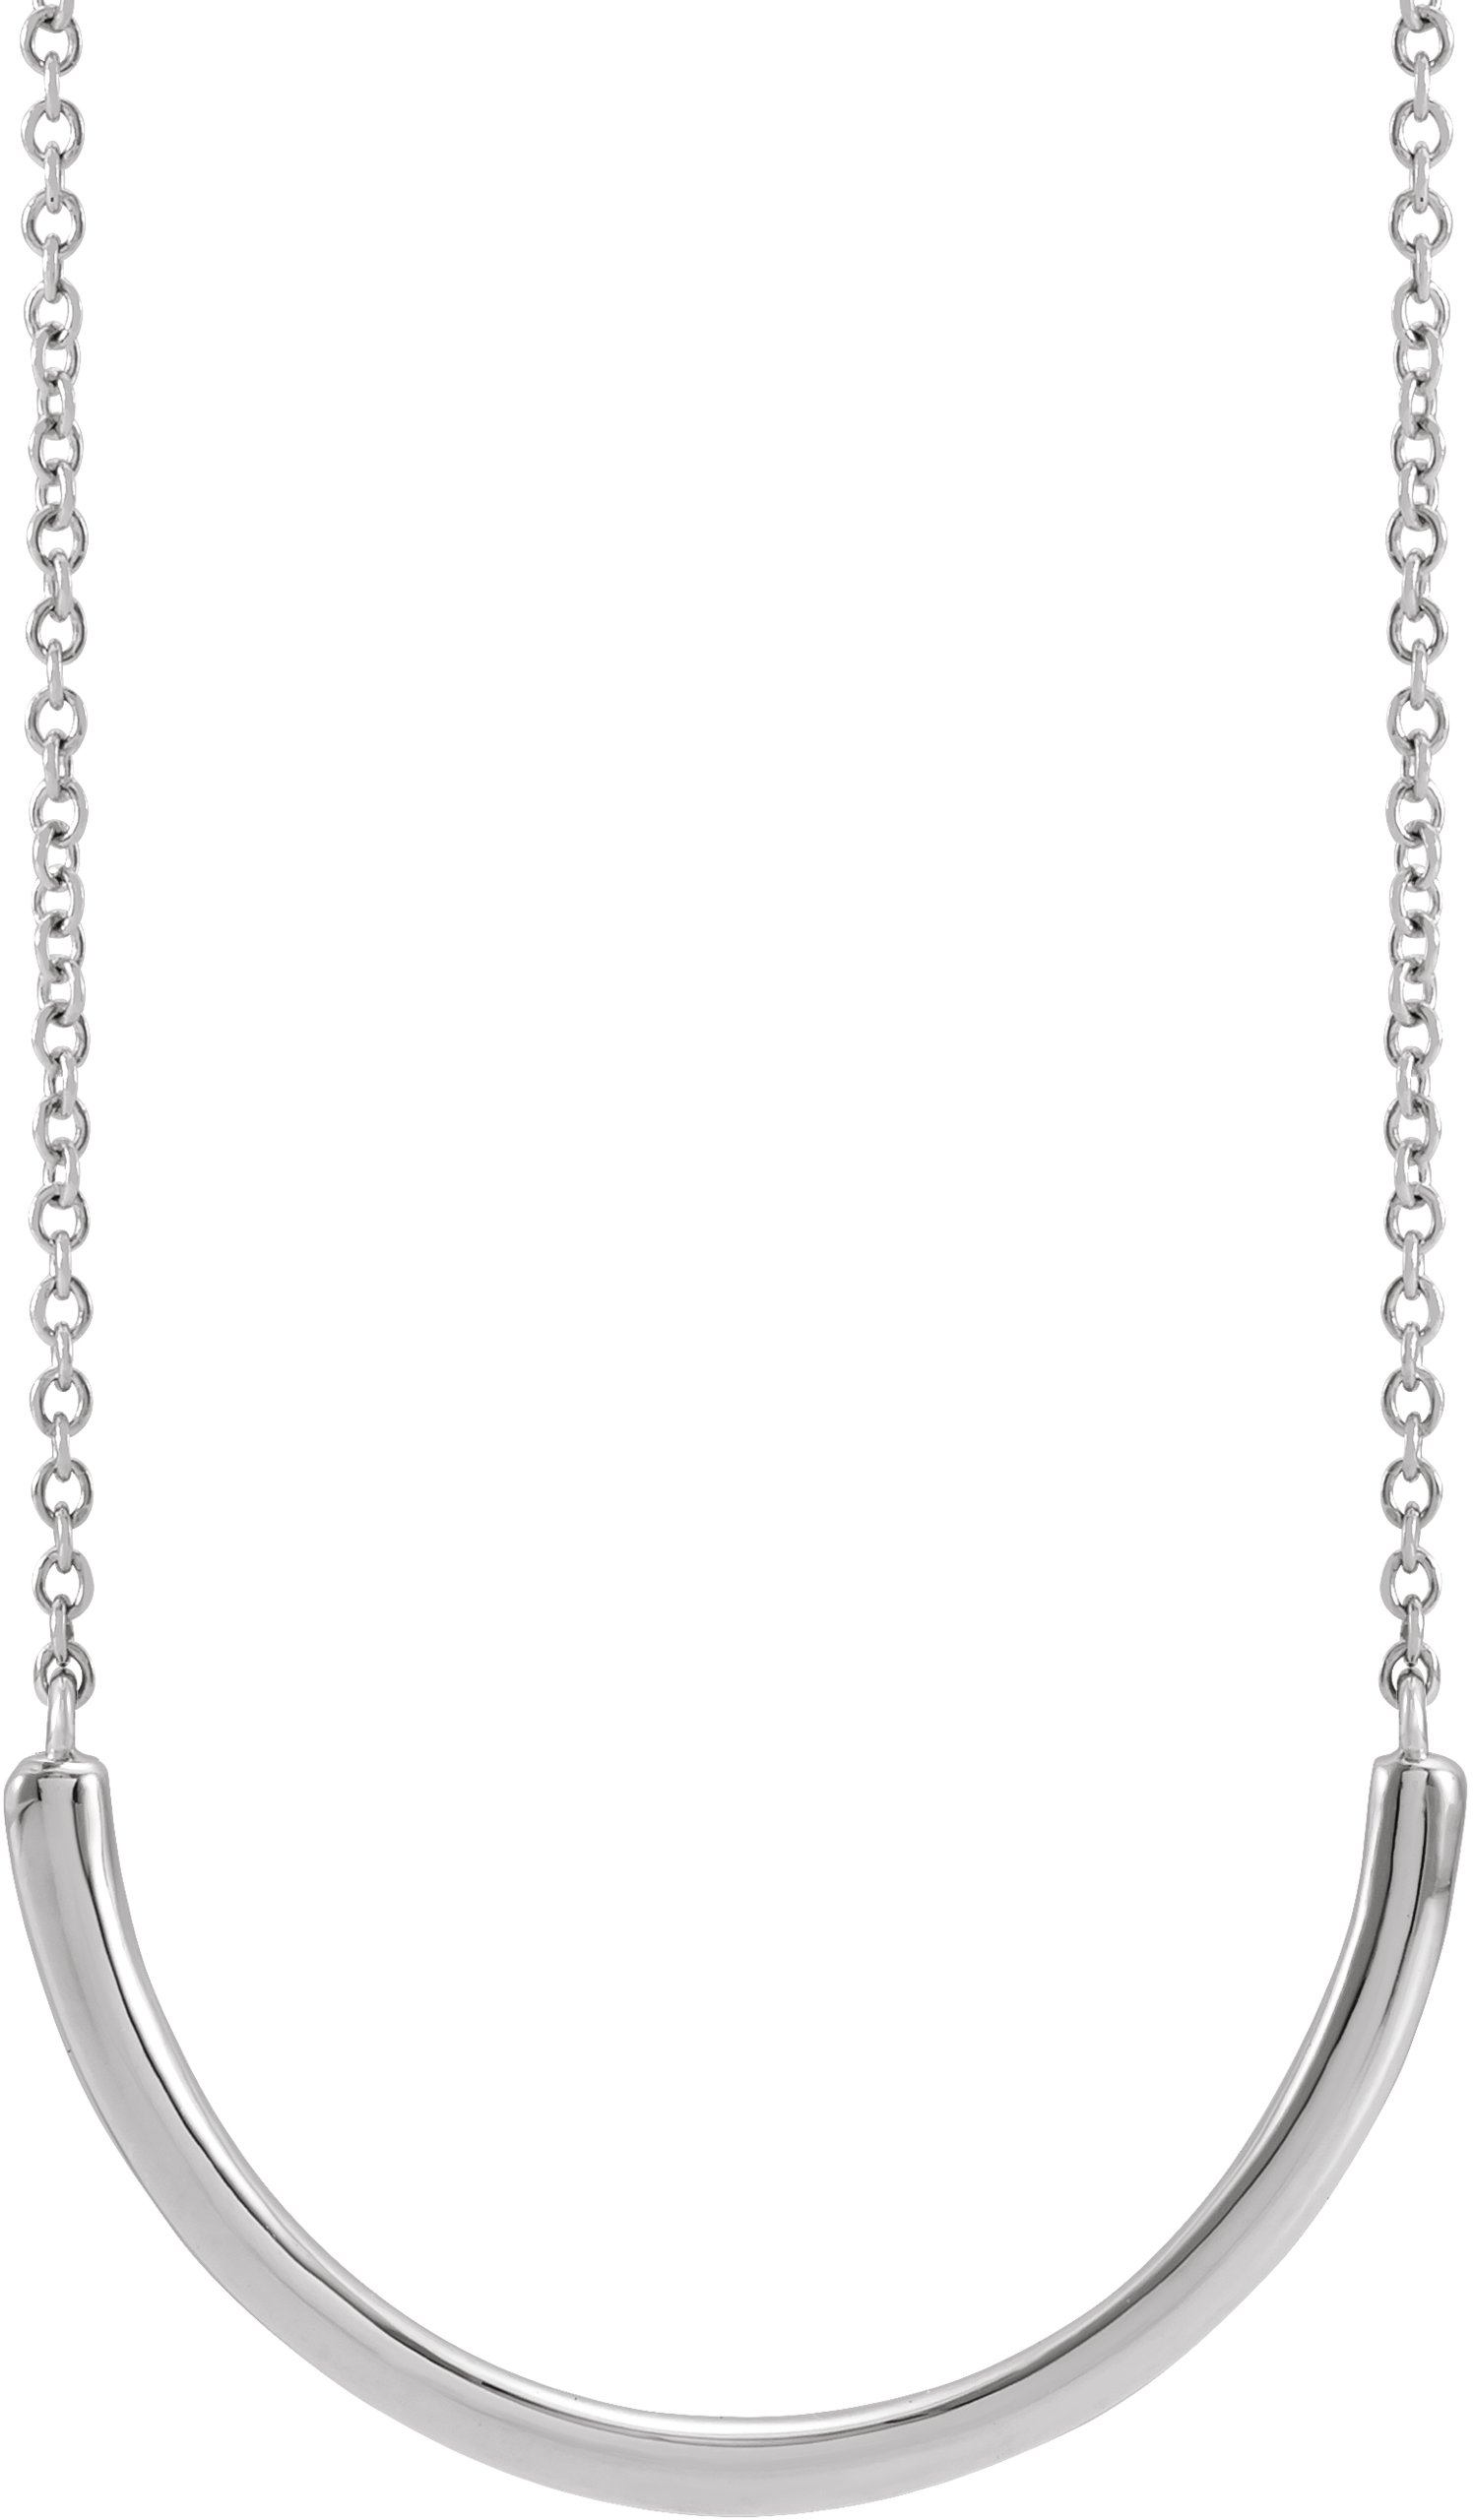 14K White 22.2x9.3 mm Curved Bar 18" Necklace